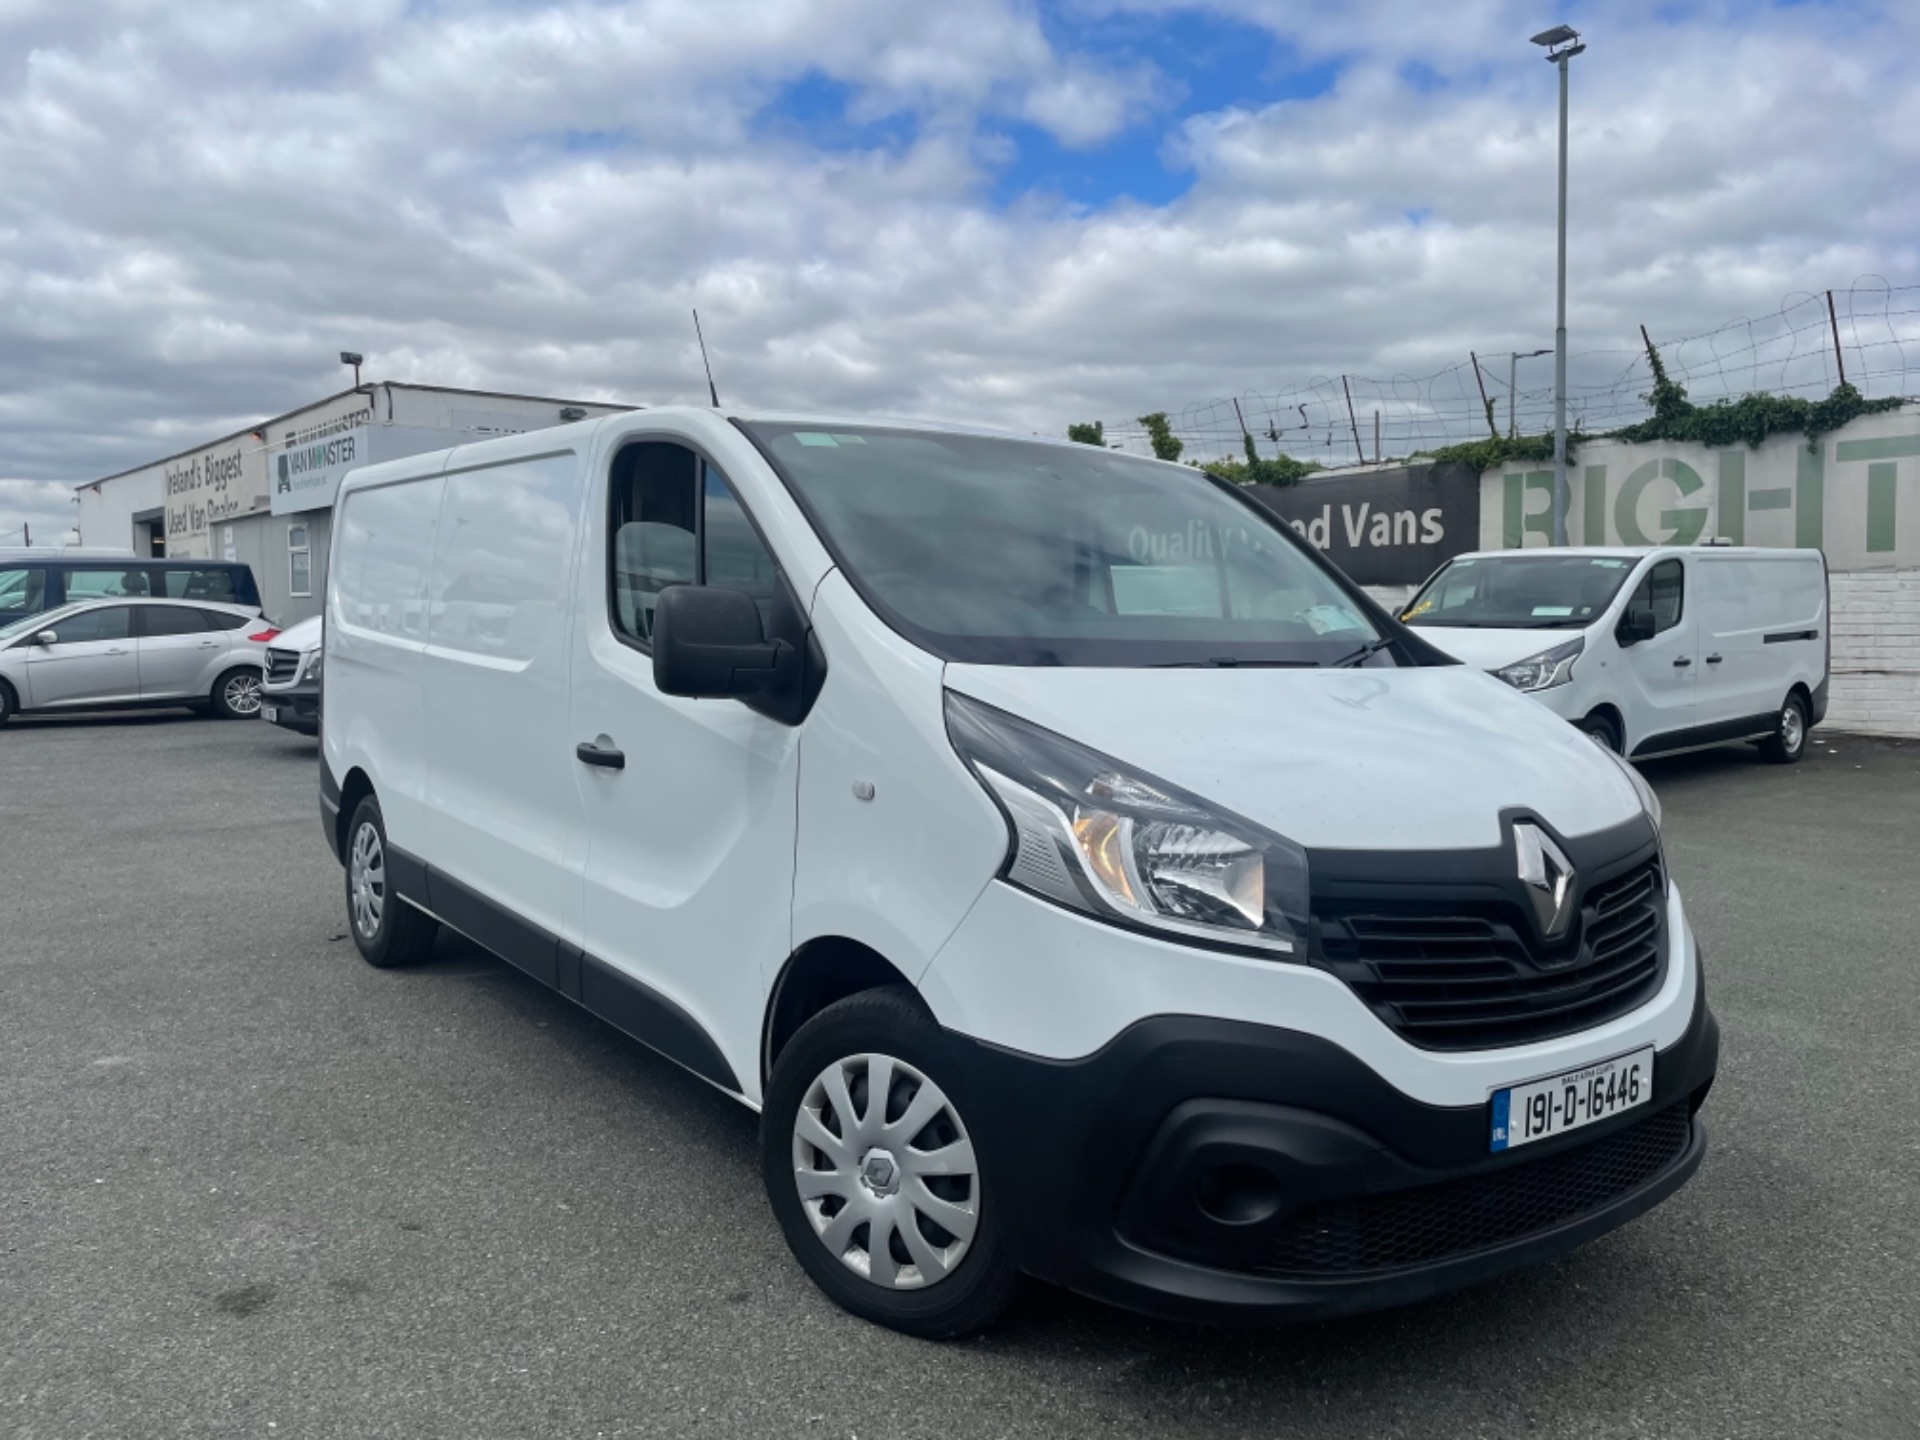 2019 Renault Trafic LL29 DCI 120 Business (191D16446) Image 1